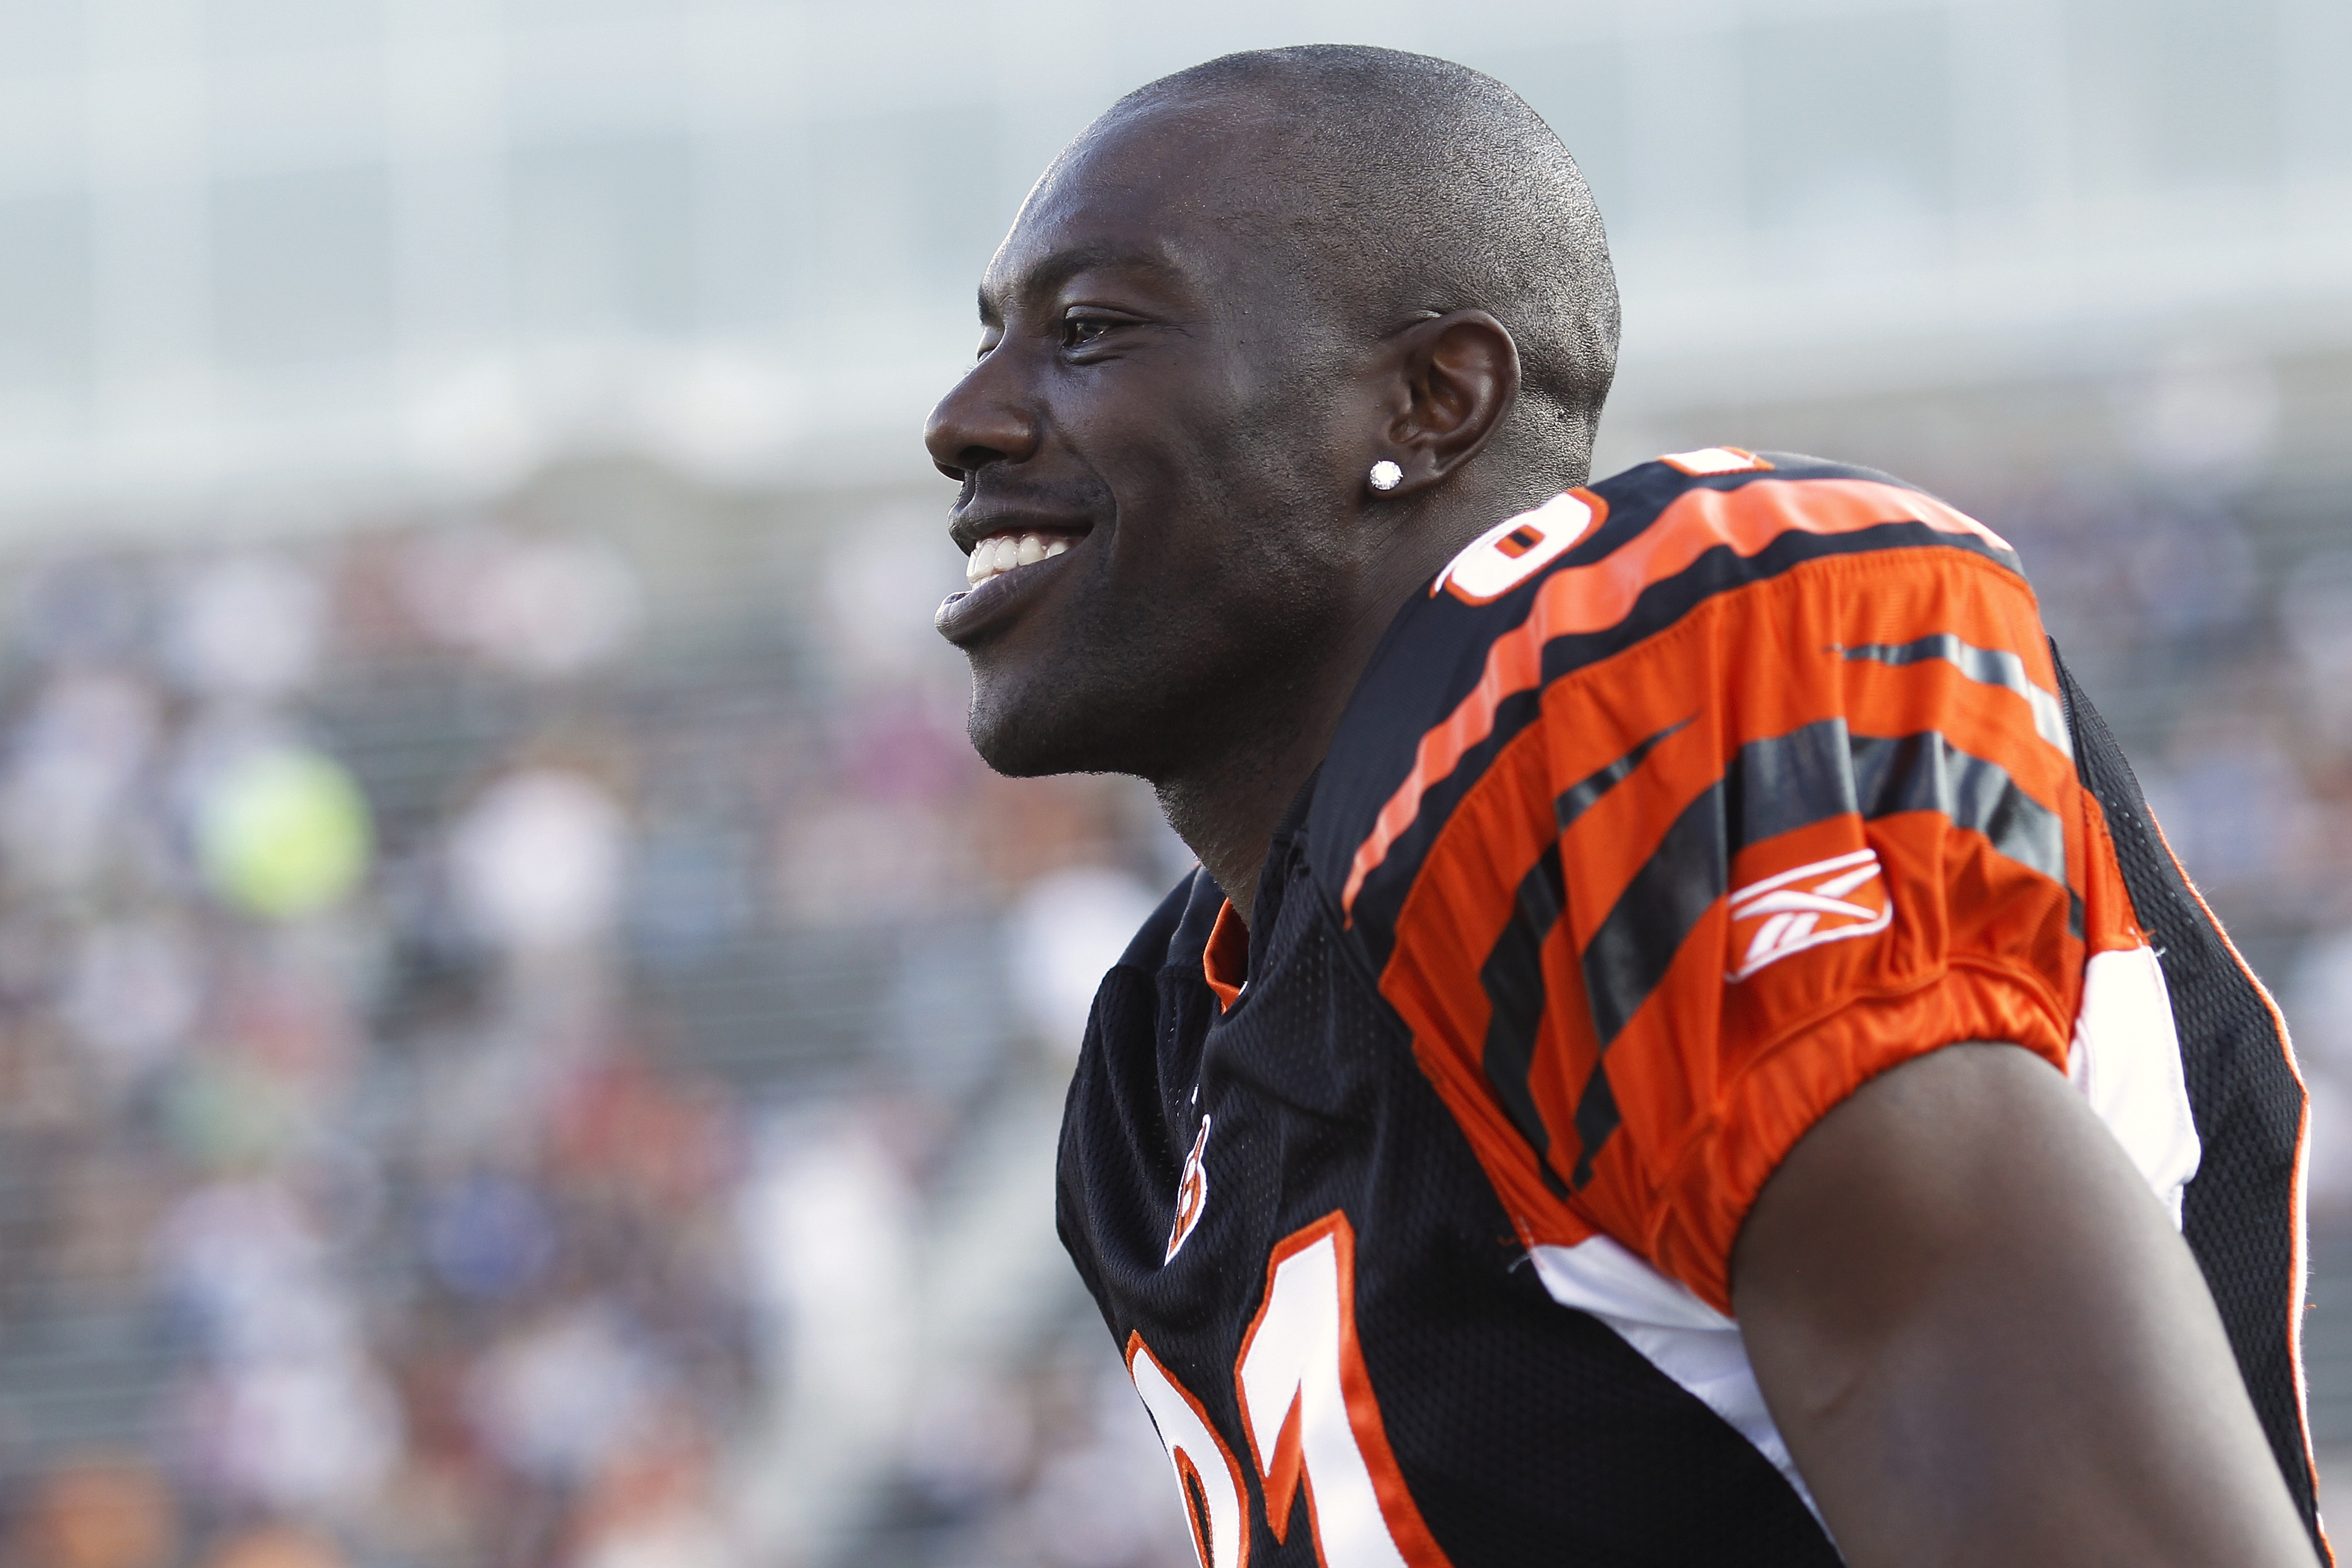 You look happy now, T.O., but just wait until you drop 10 passes and blame it on Carson Palmer